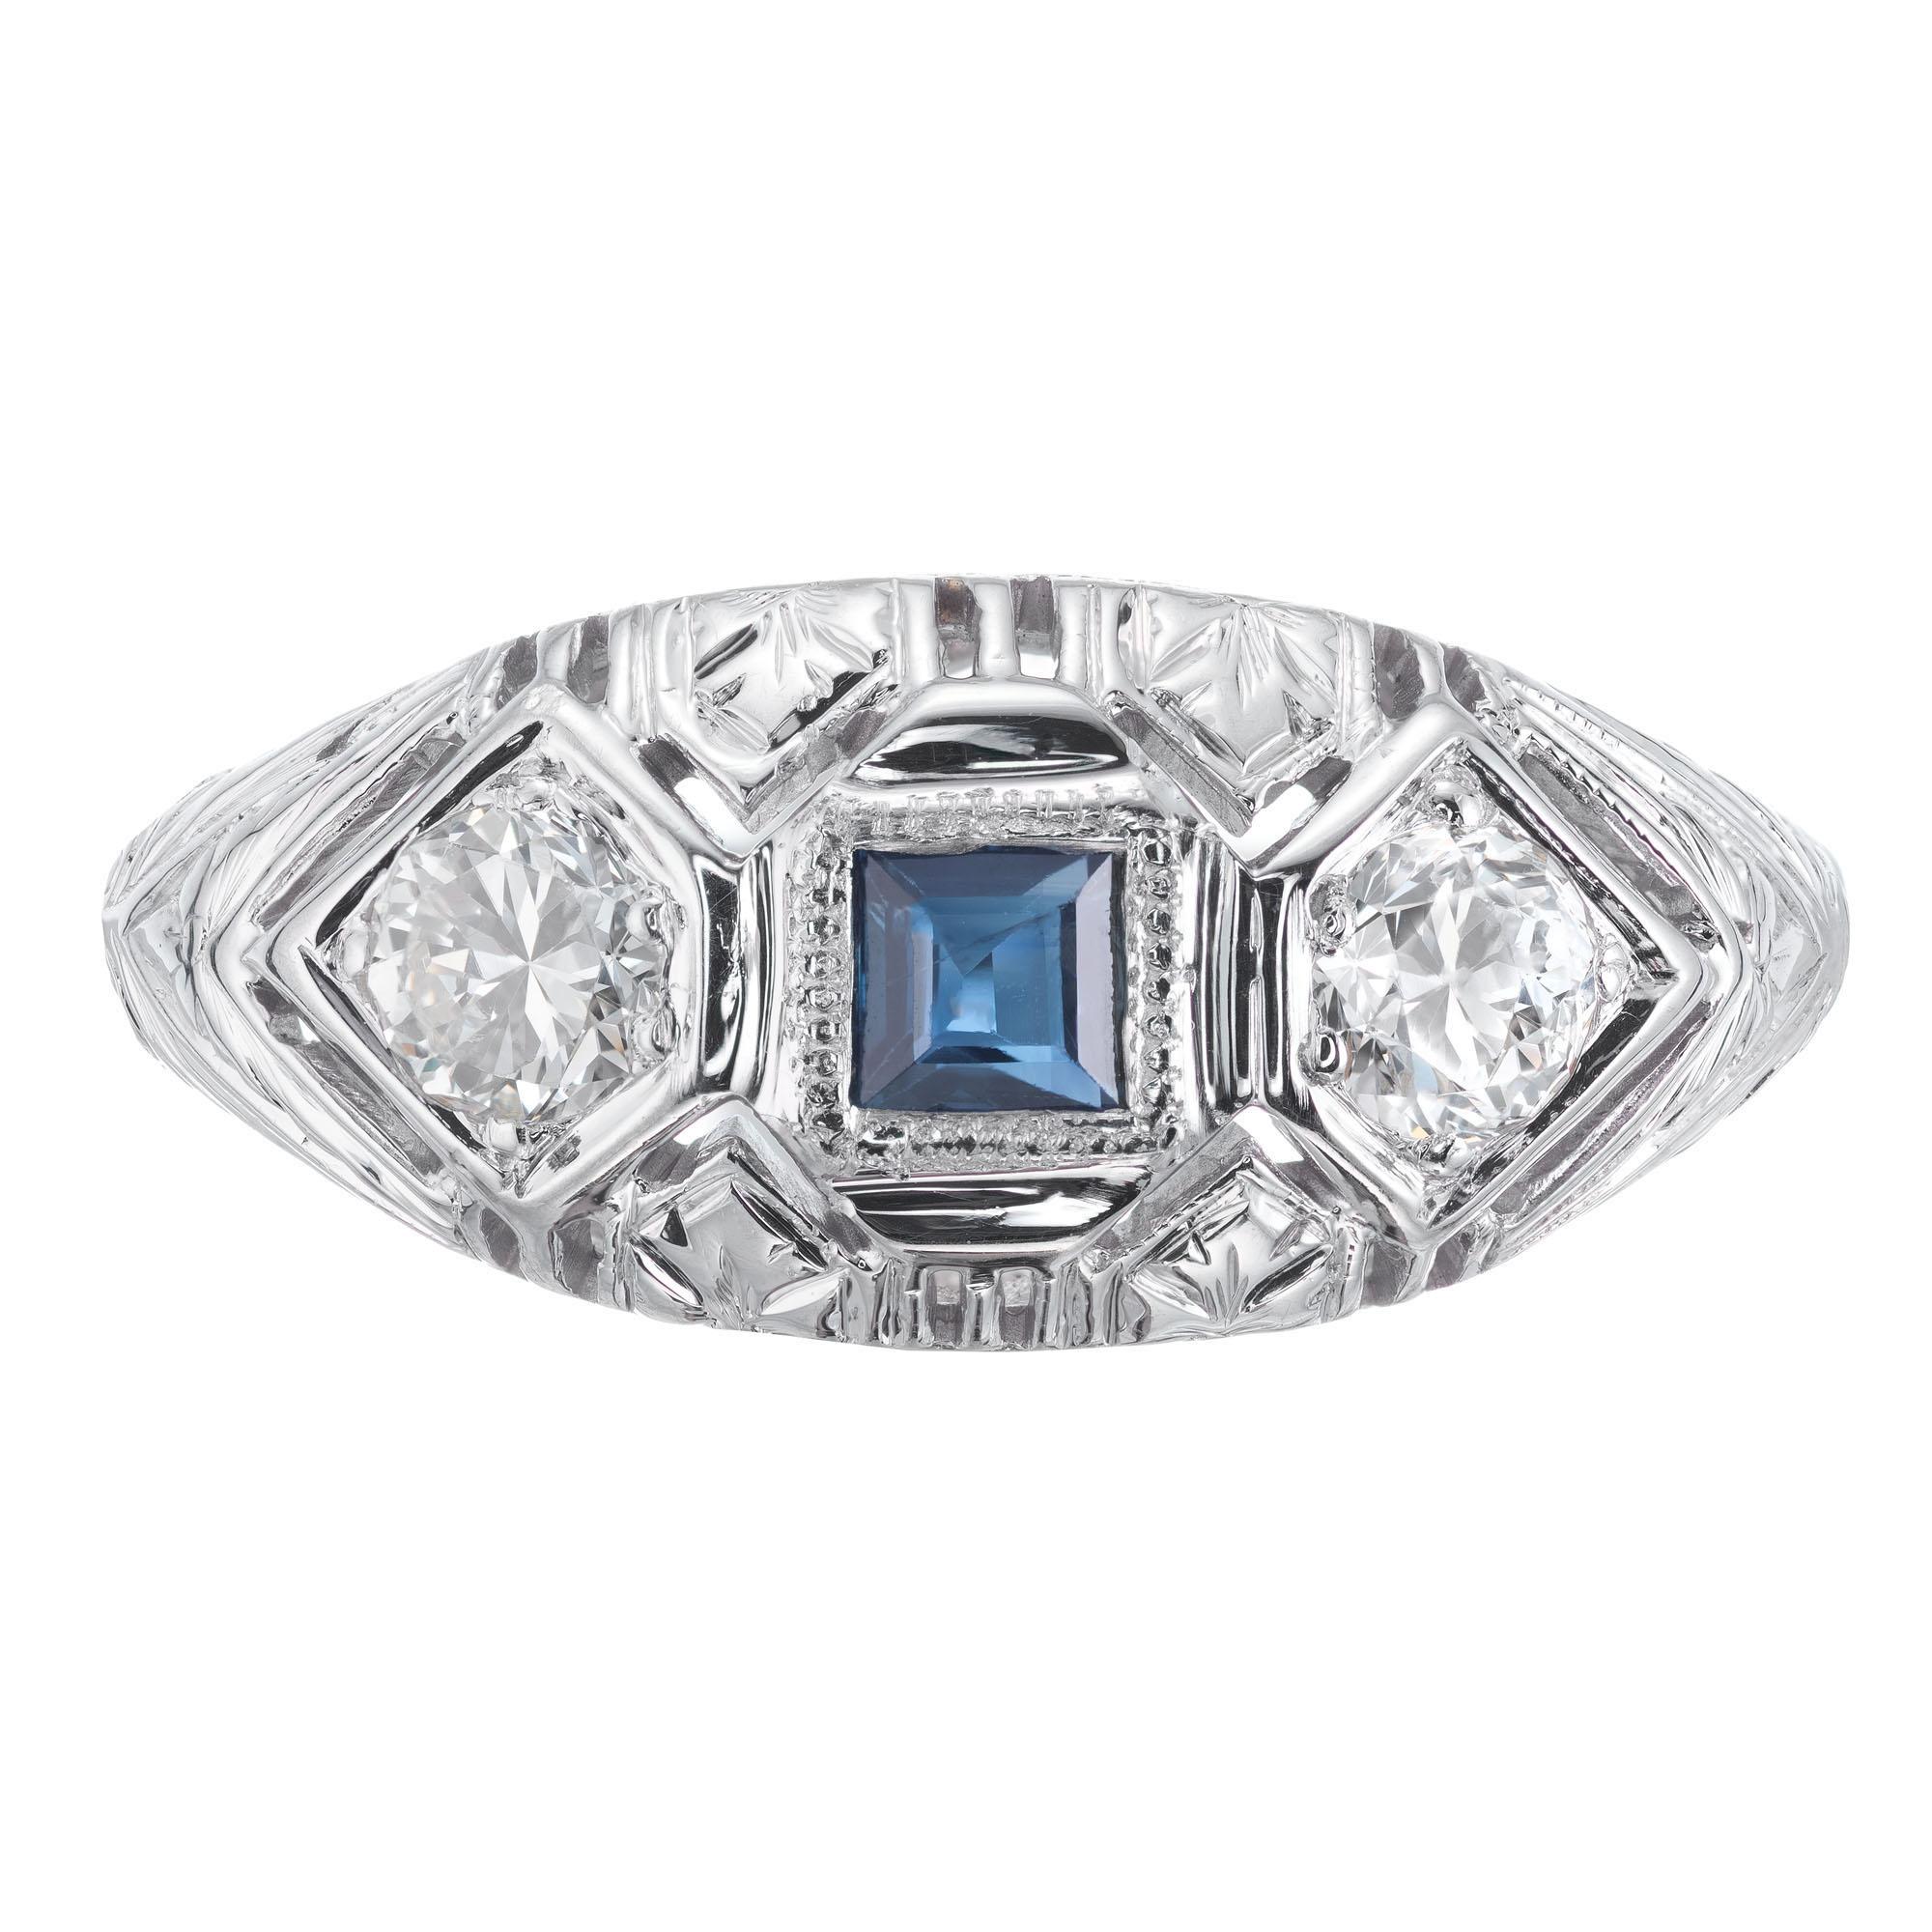 Classic 1930’s art deco square sapphire round diamond engraved and filigree ring in 18k white gold.  

1 square blue sapphire SI, approx. .17ct
2 round brilliant cut diamonds G VS, approx. .32ct
Size 6.75 and sizable 
18k white gold 
Tested: 18k
3.2